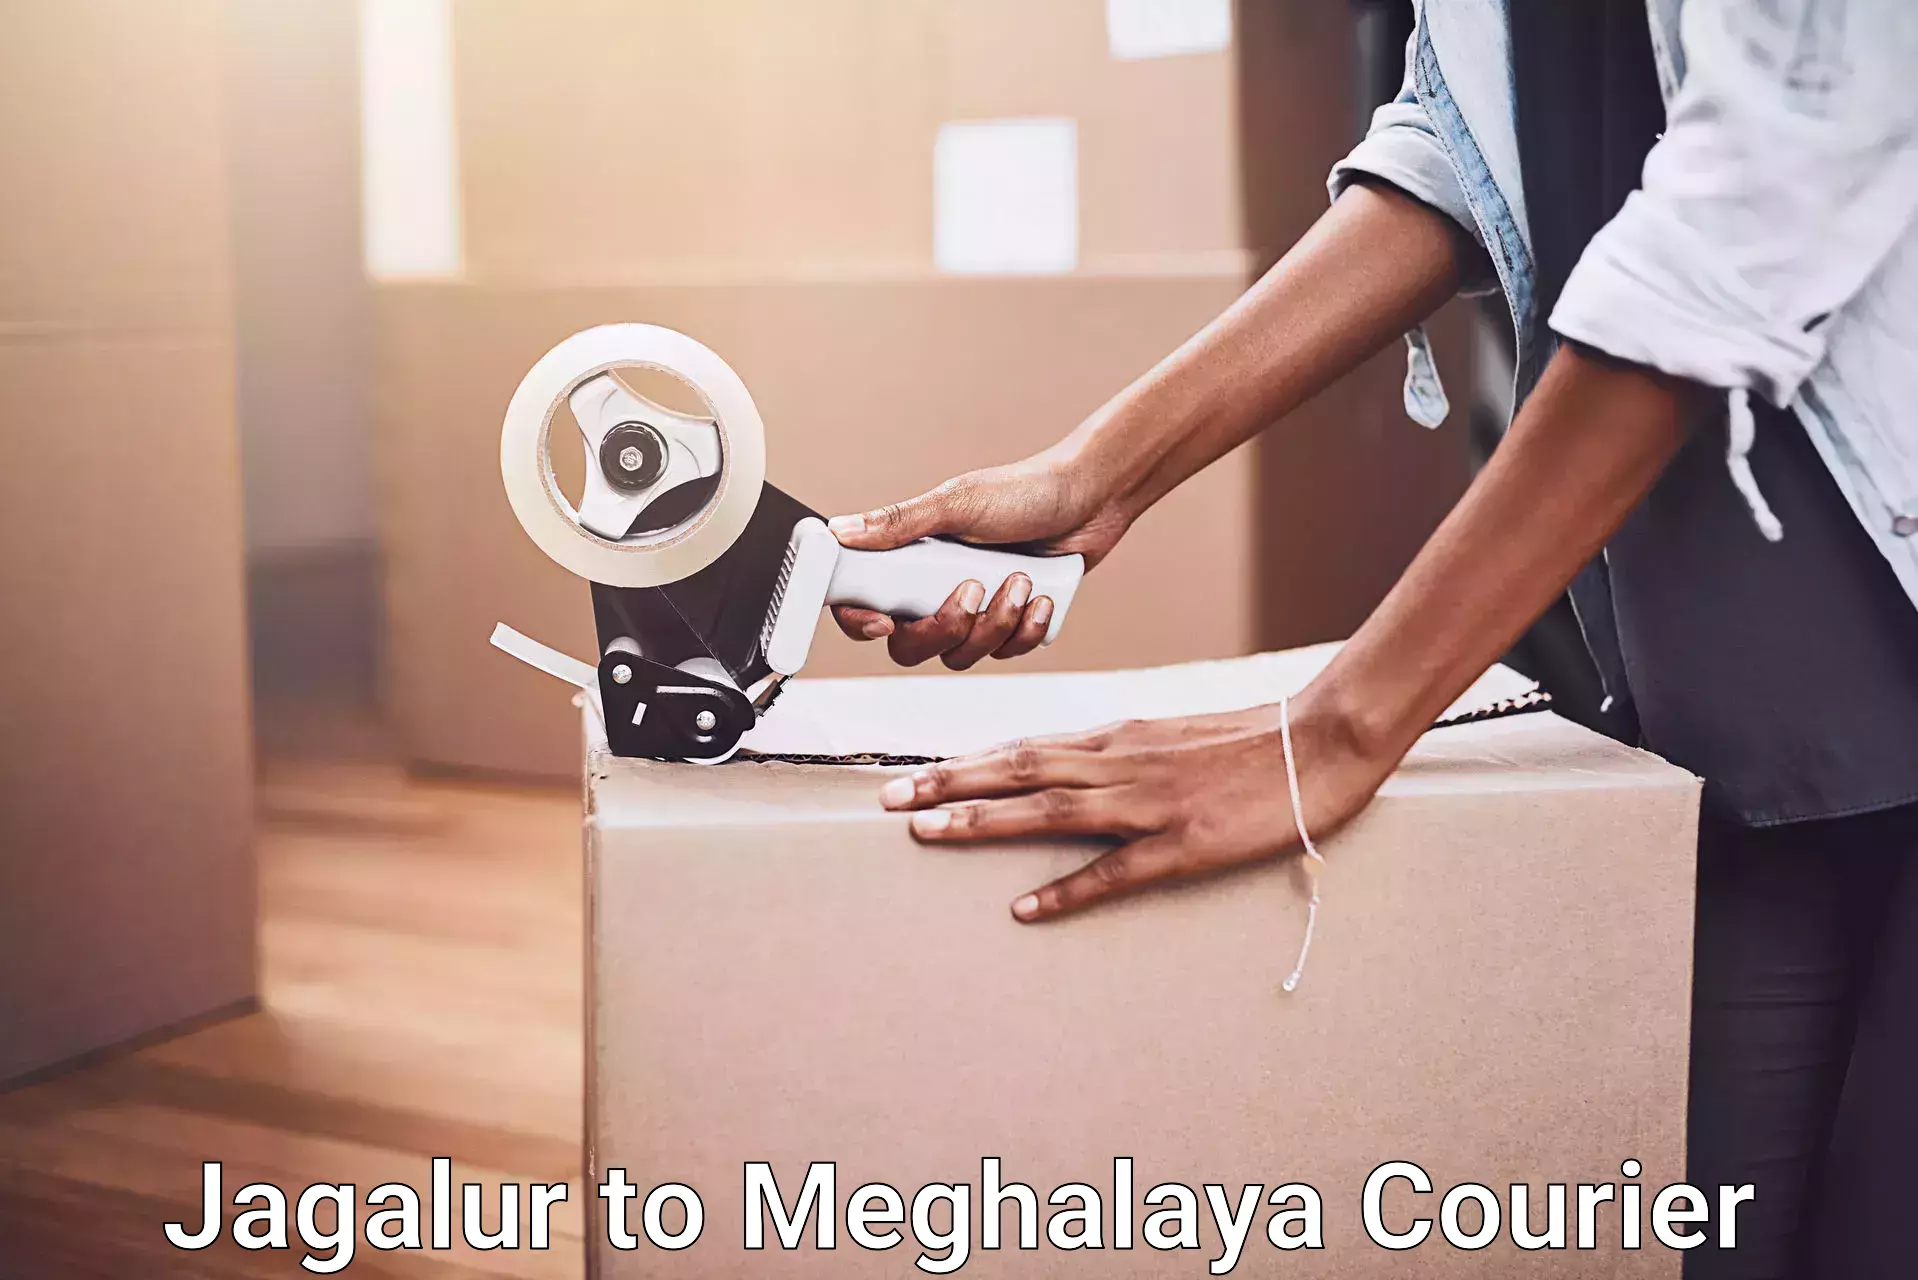 Trusted relocation experts Jagalur to Meghalaya